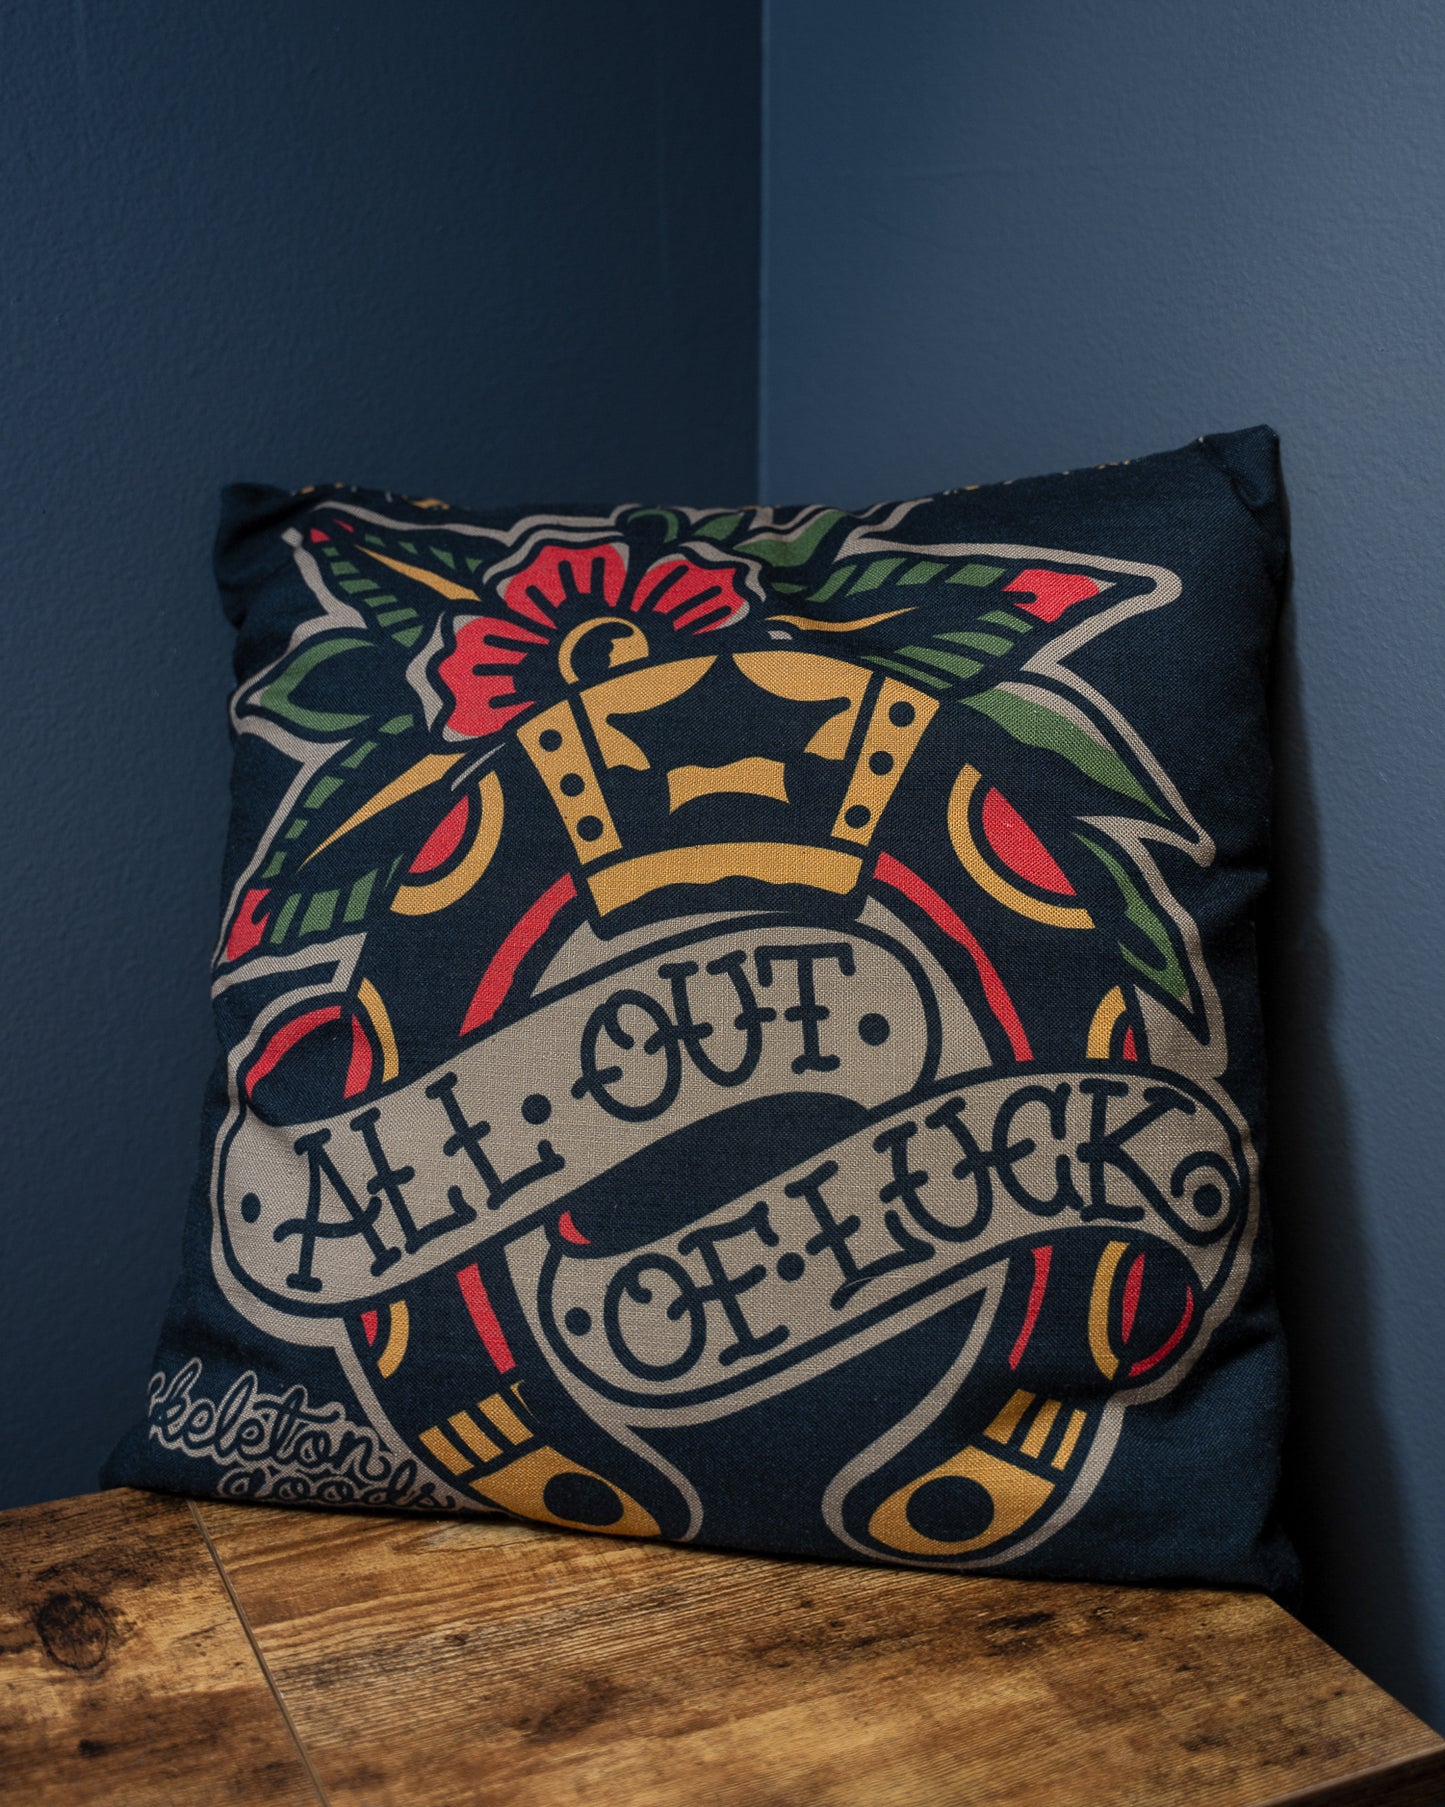 All Out of Luck Throw Pillow Case